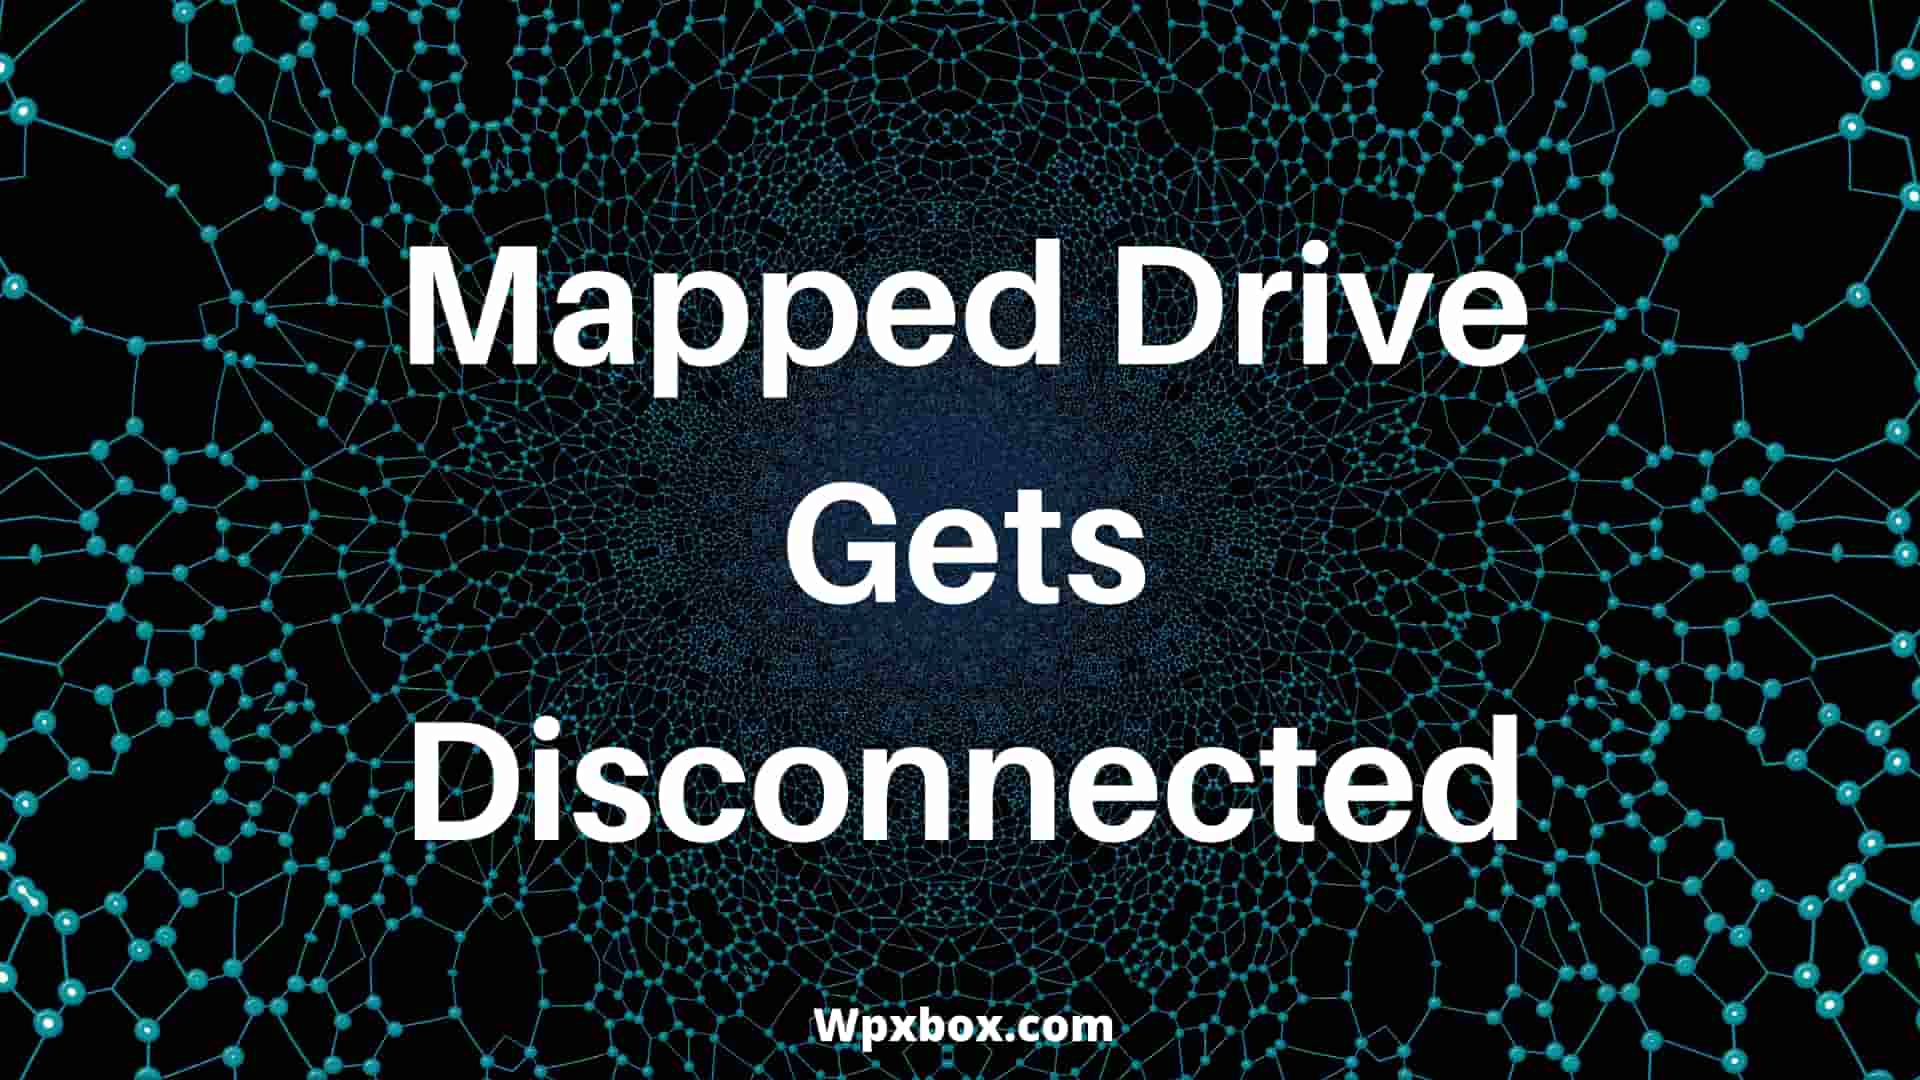 Fix: Mapped Drive Gets Disconnected While Copying Large Files in Windows